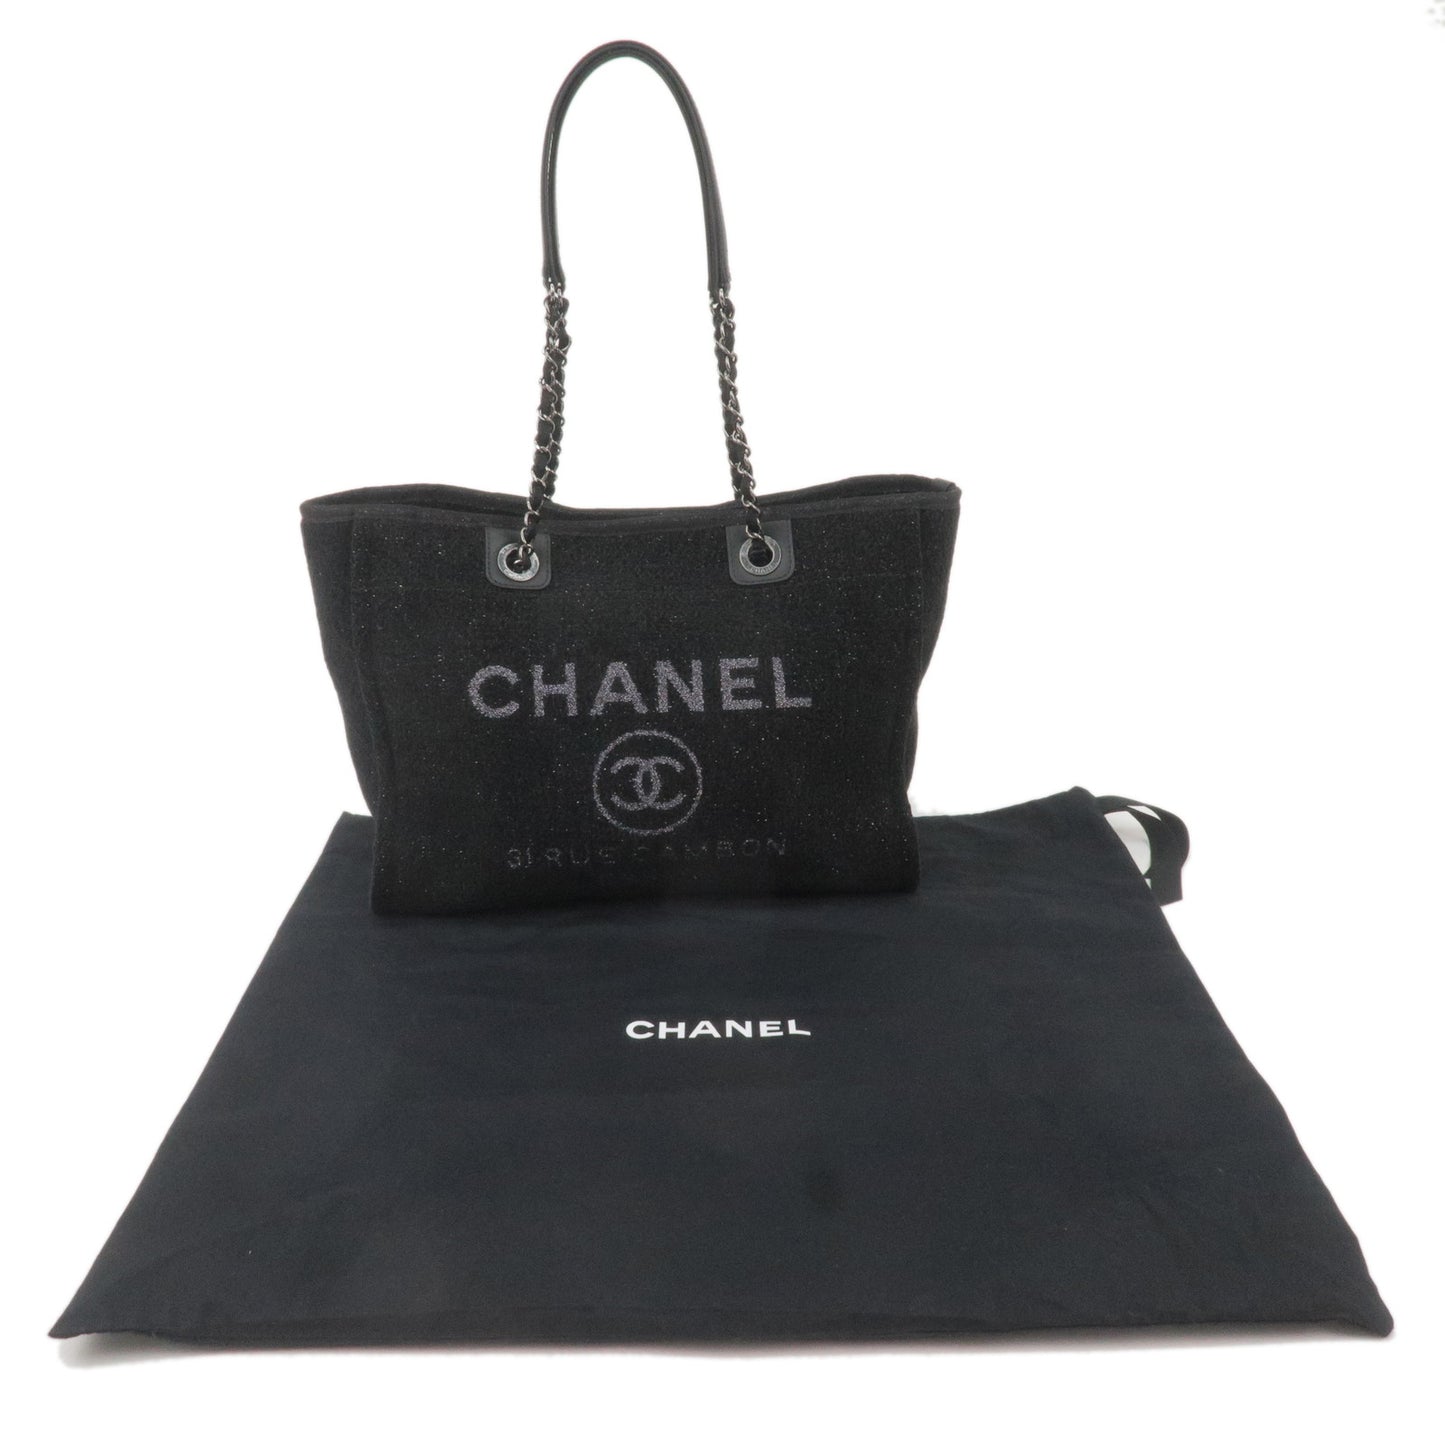 CHANEL Deauville Tweed Leather Deauville MM Chain Tote Bag A67001